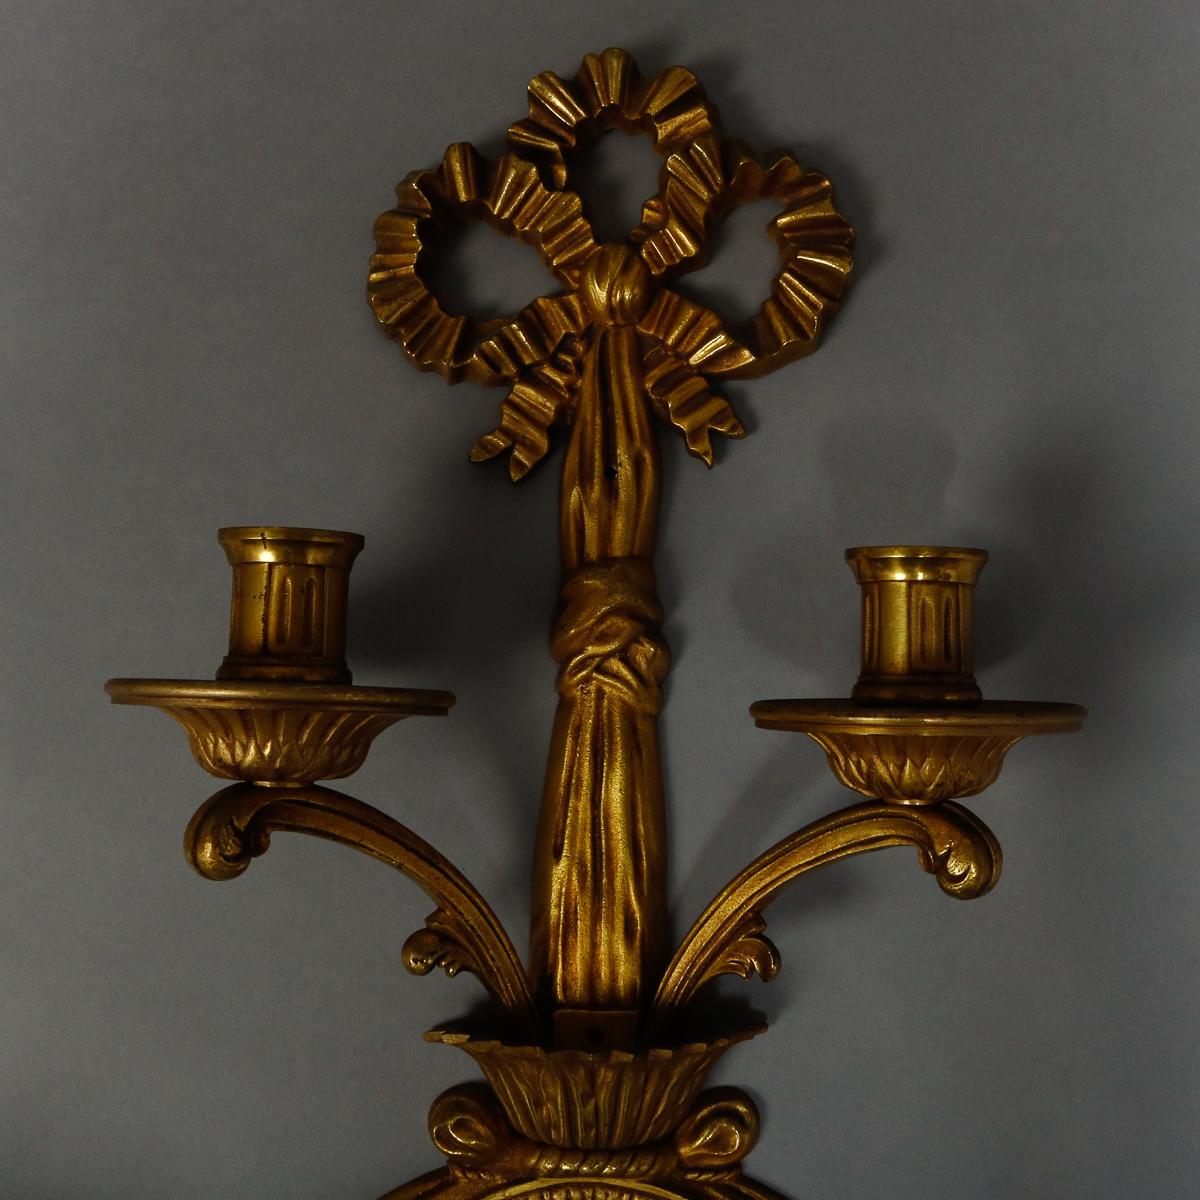 Hand-Painted Antique French Classical Gilt Bronze and Sevres Porcelain Candle Sconces